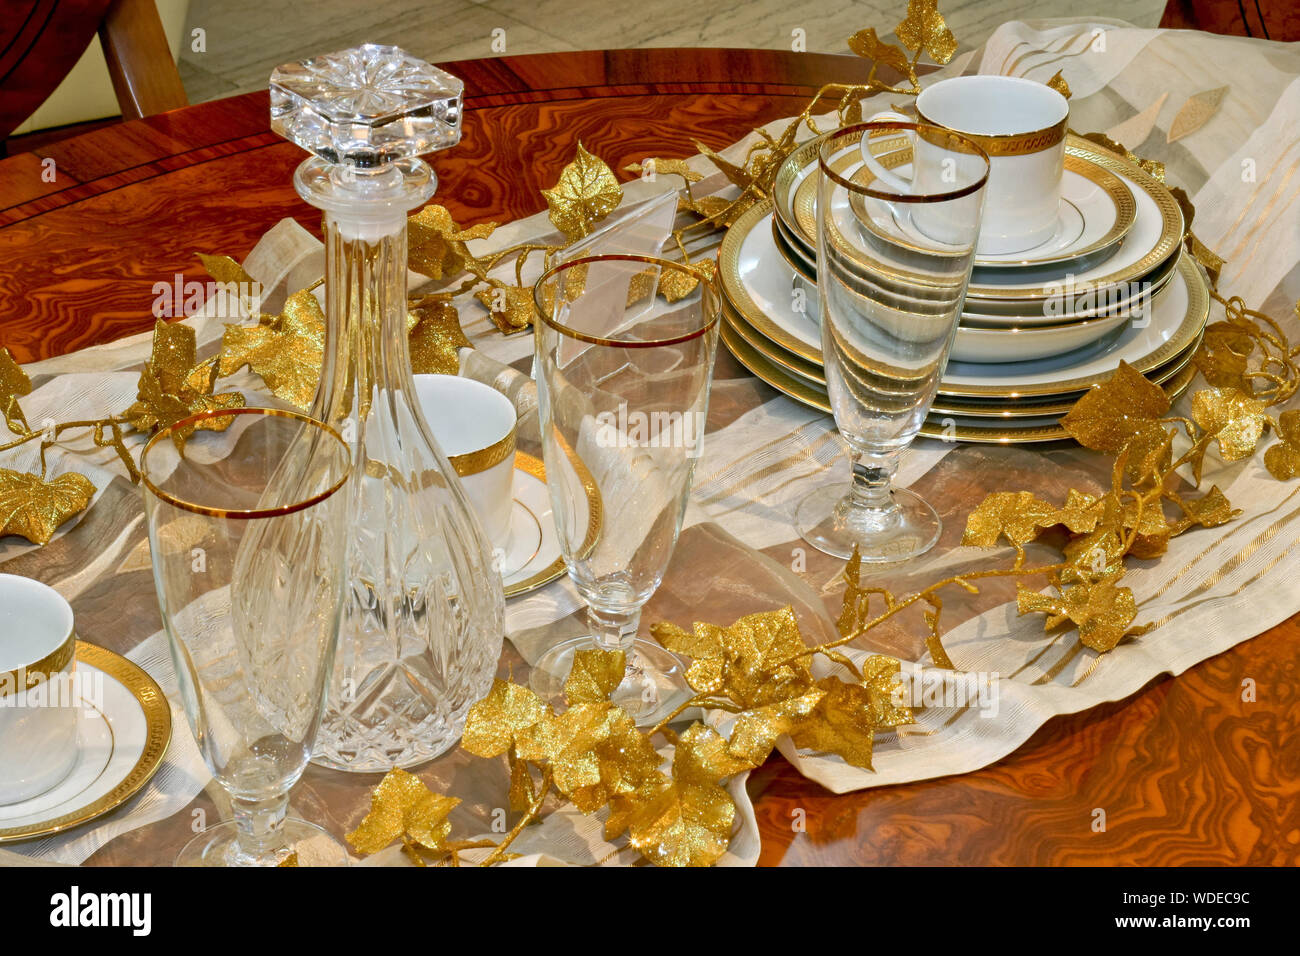 Luxury and expensive golden crockery and tableware Stock Photo - Alamy